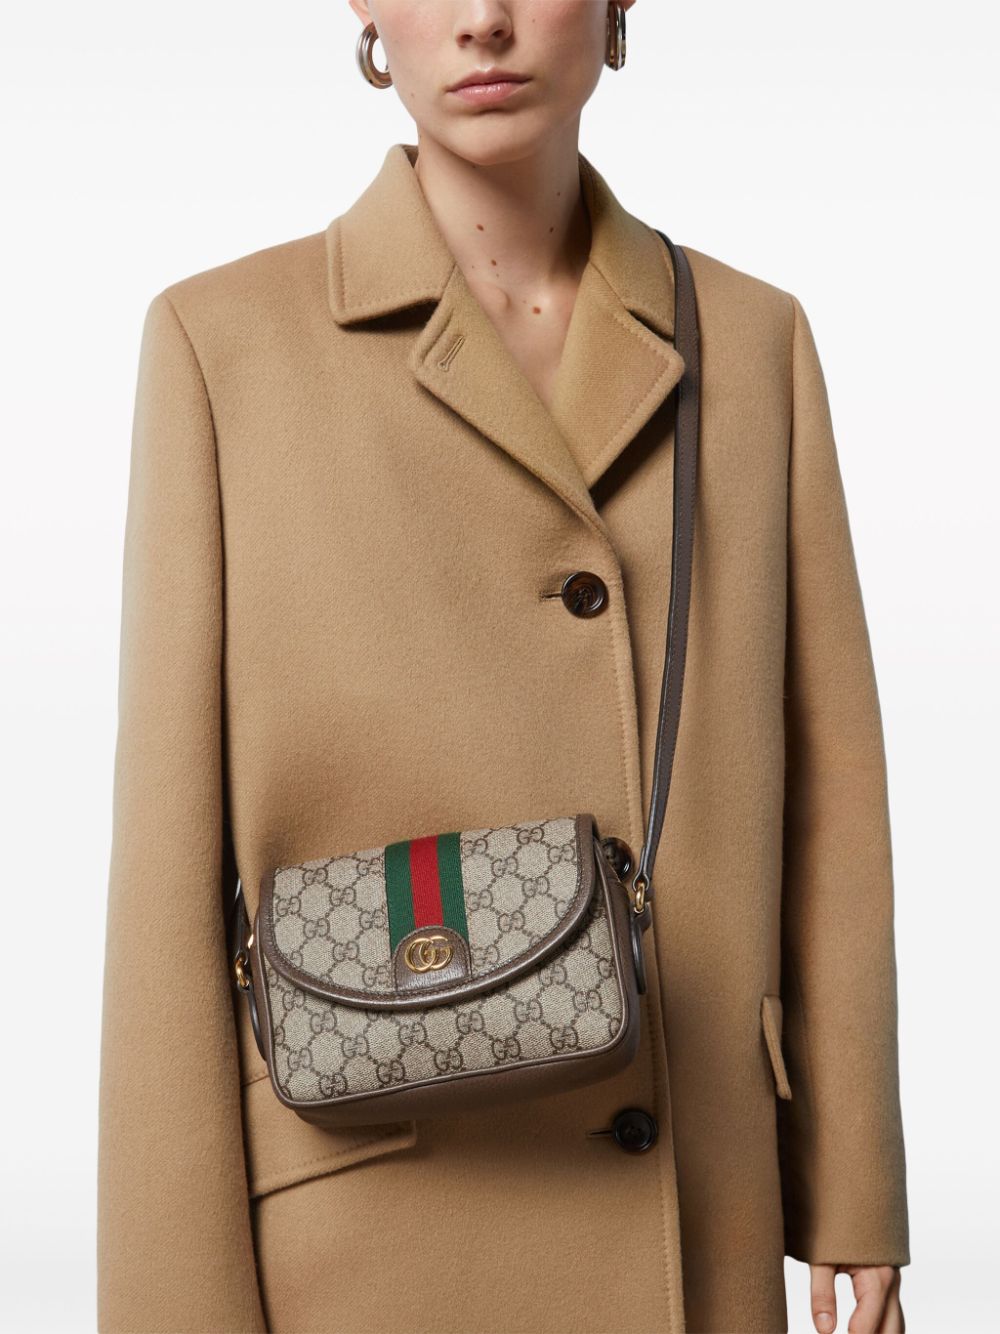 GUCCI Mini Canvas Shoulder Bag with Green and Red Web, Tan Leather Trims & Gold-Tone Accents, 19x13x5cm